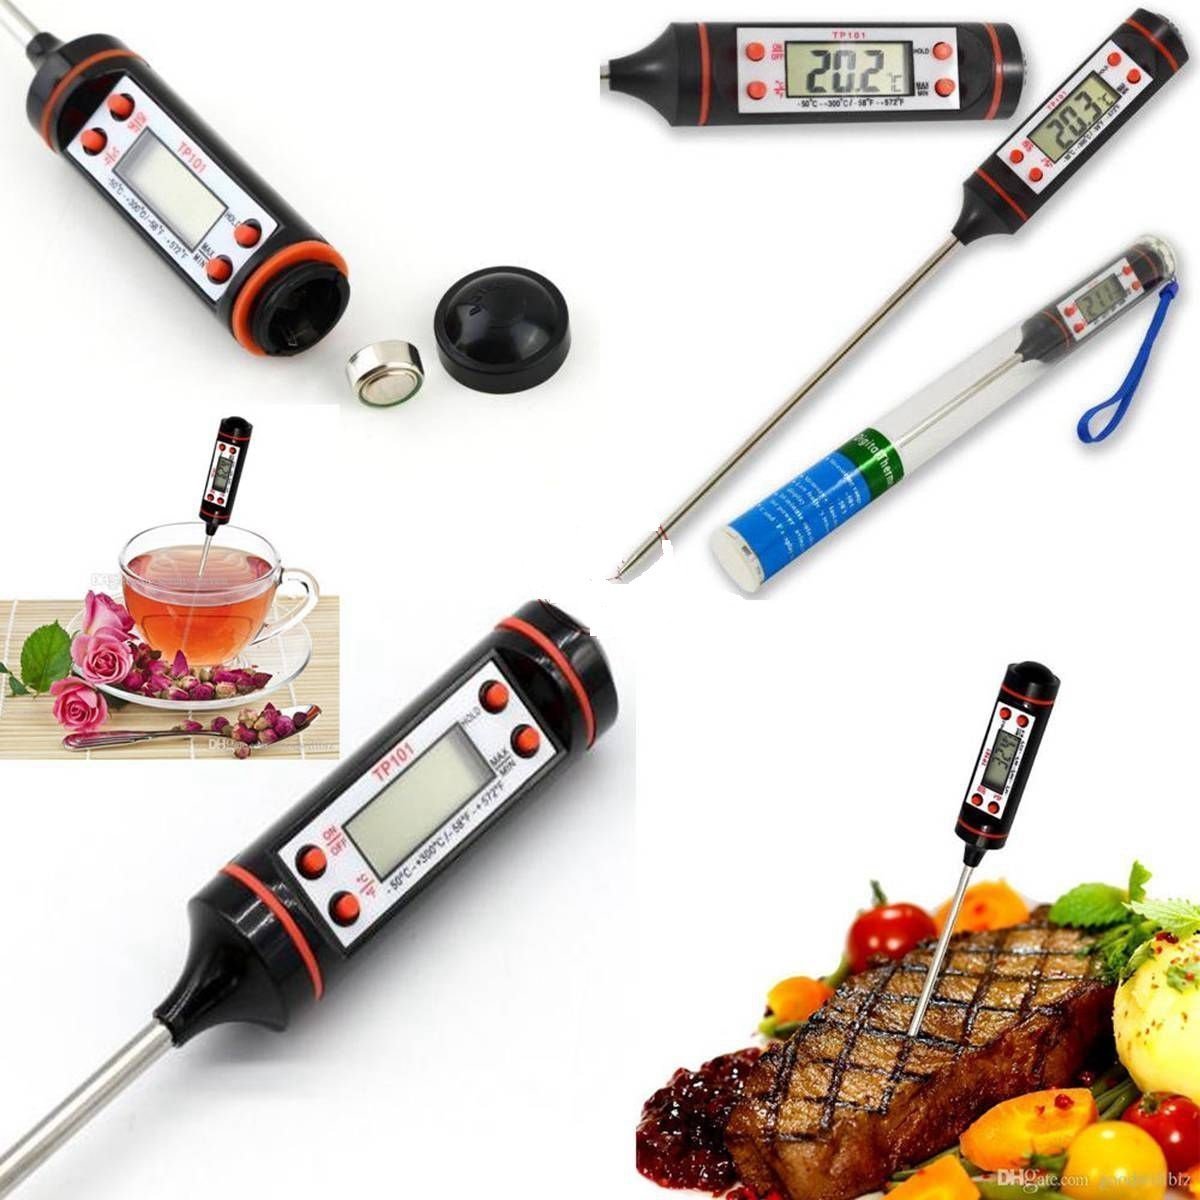 TBBSC Meat Thermometer,Instant Read Digital Cooking Thermometer,Electronic Food Thermometer with Super Long Probe for Kitchen,Milk,Candy,BBQ and Grill